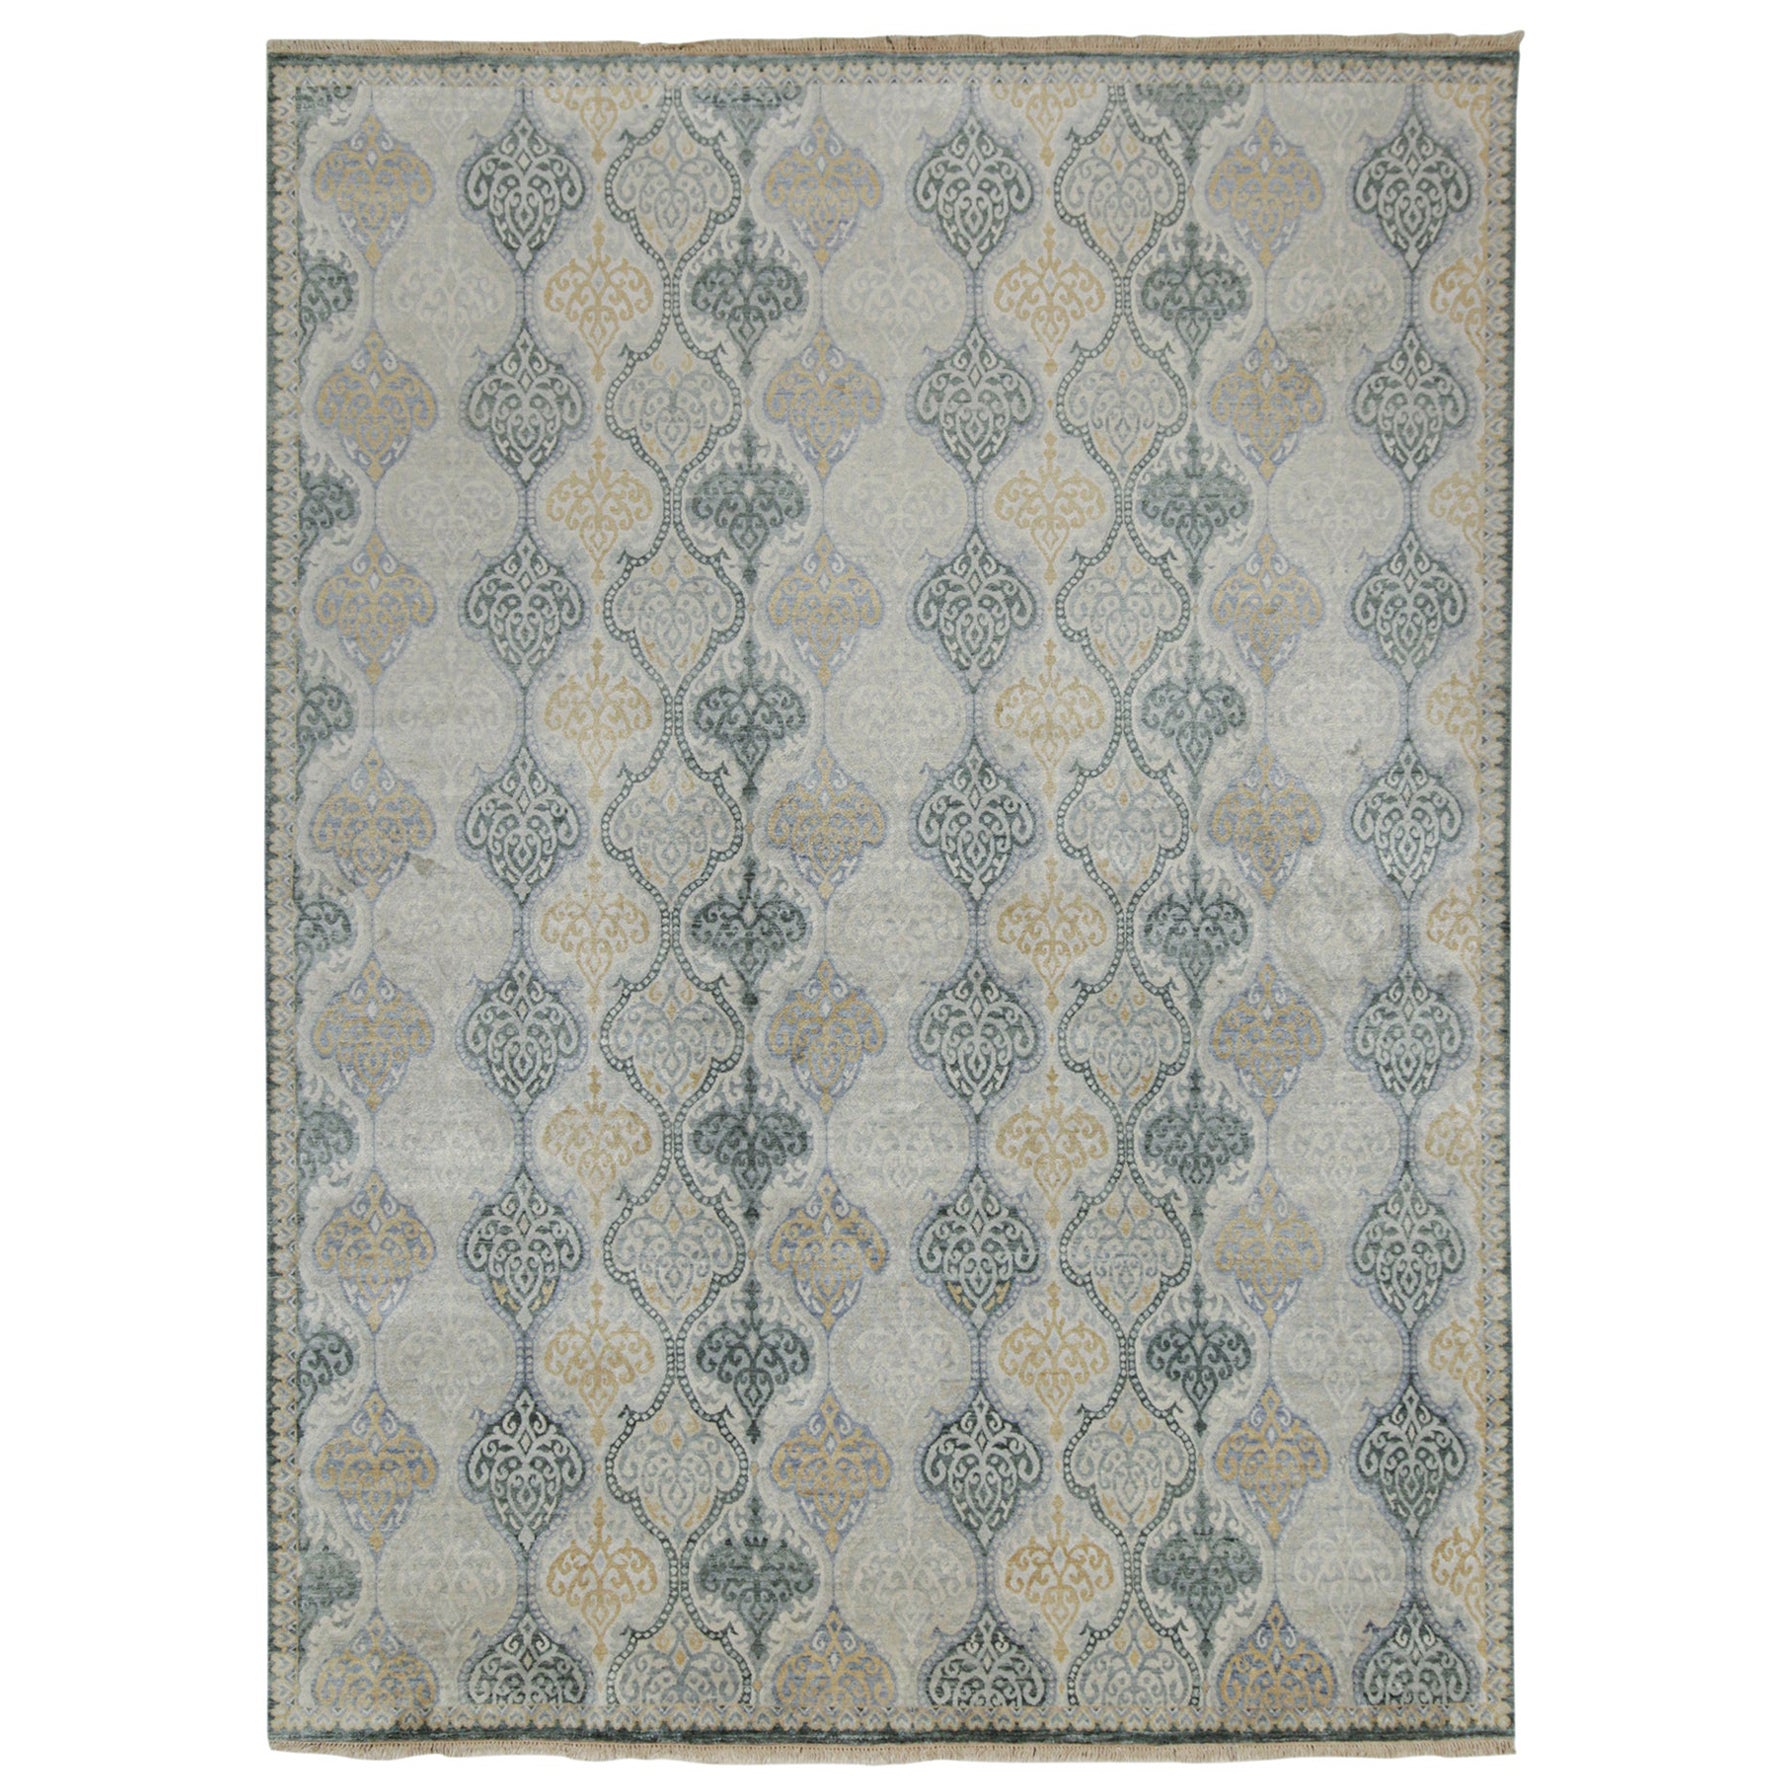 Rug & Kilim’s Classic Style Rug with Gray, Beige and Gold Pattern For Sale